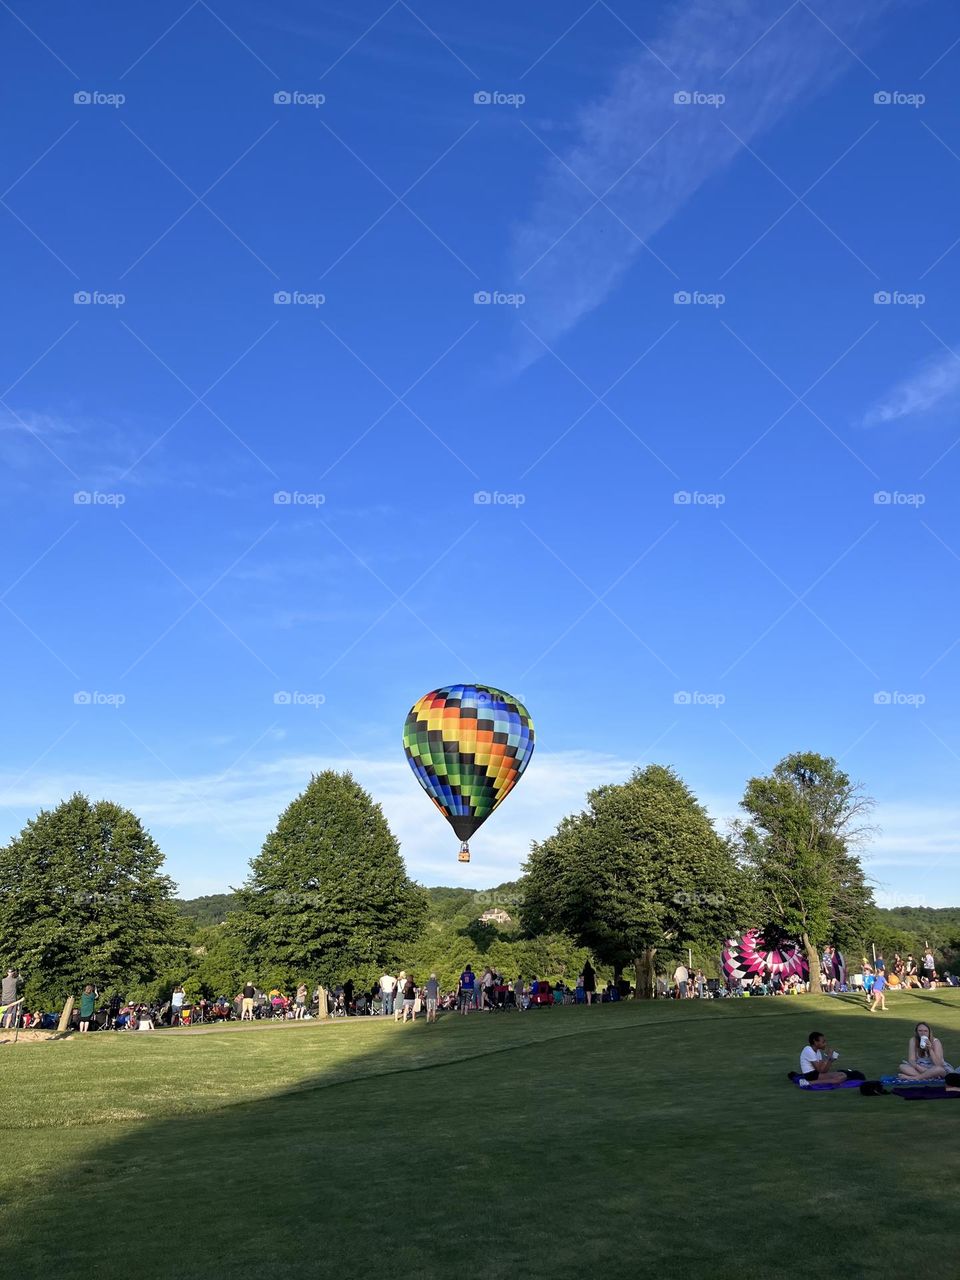 Colorful hot air balloon floating atop a grass field